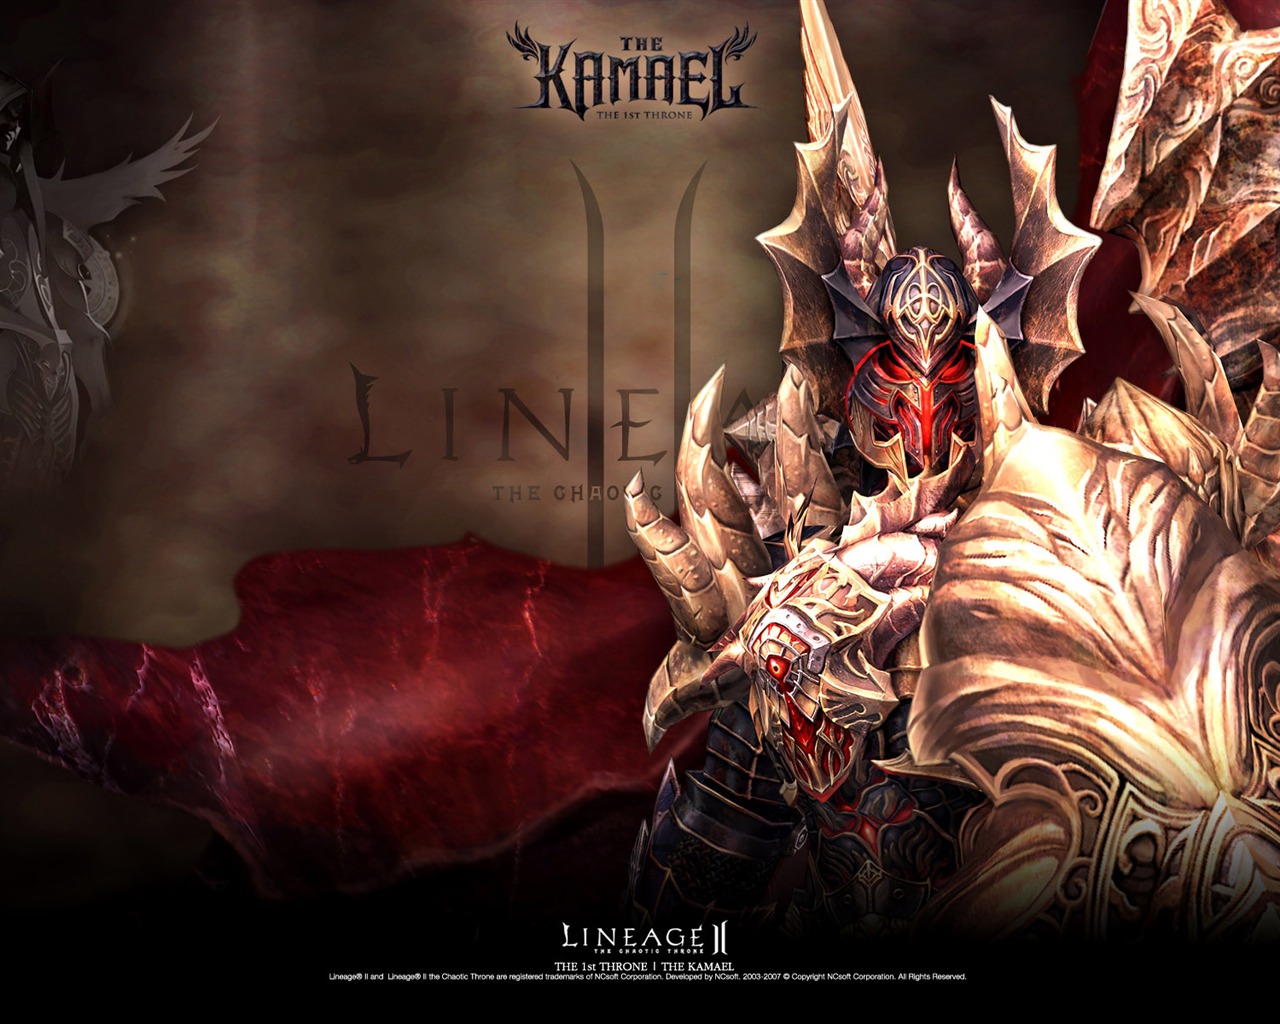 LINEAGE Ⅱ Modellierung HD-Gaming-Wallpaper #11 - 1280x1024